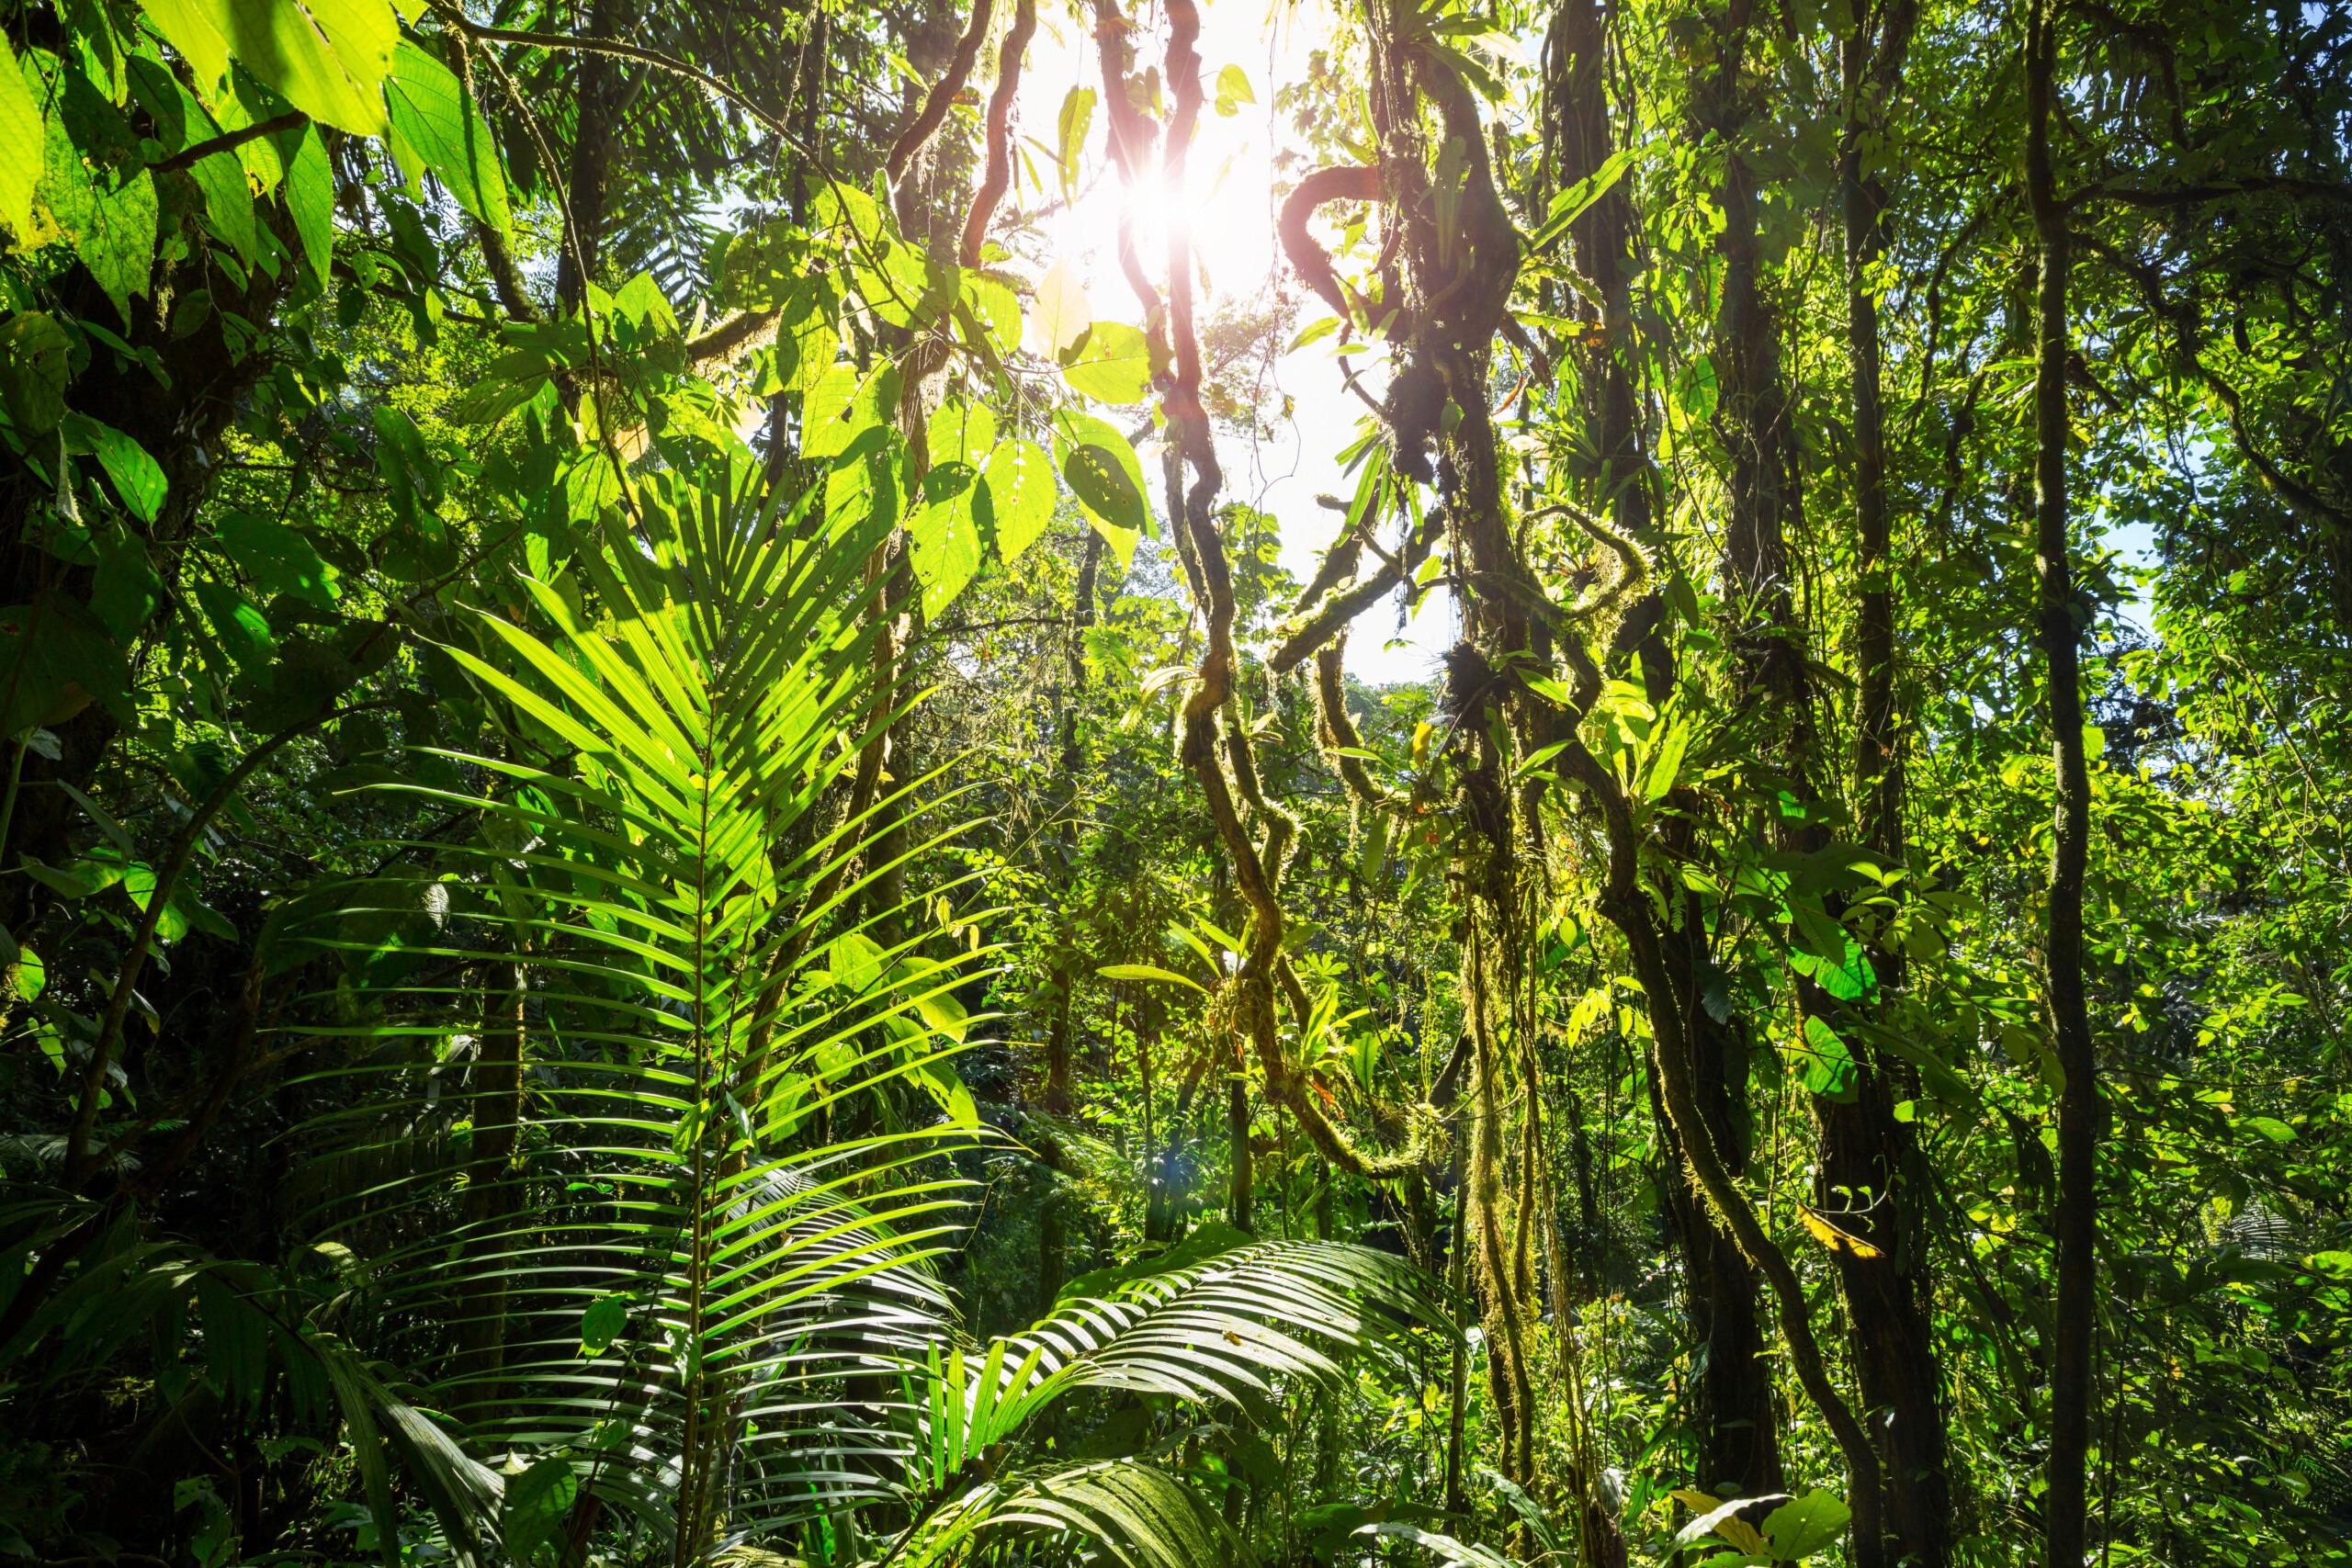 Discover forest bathing in Costa Rica